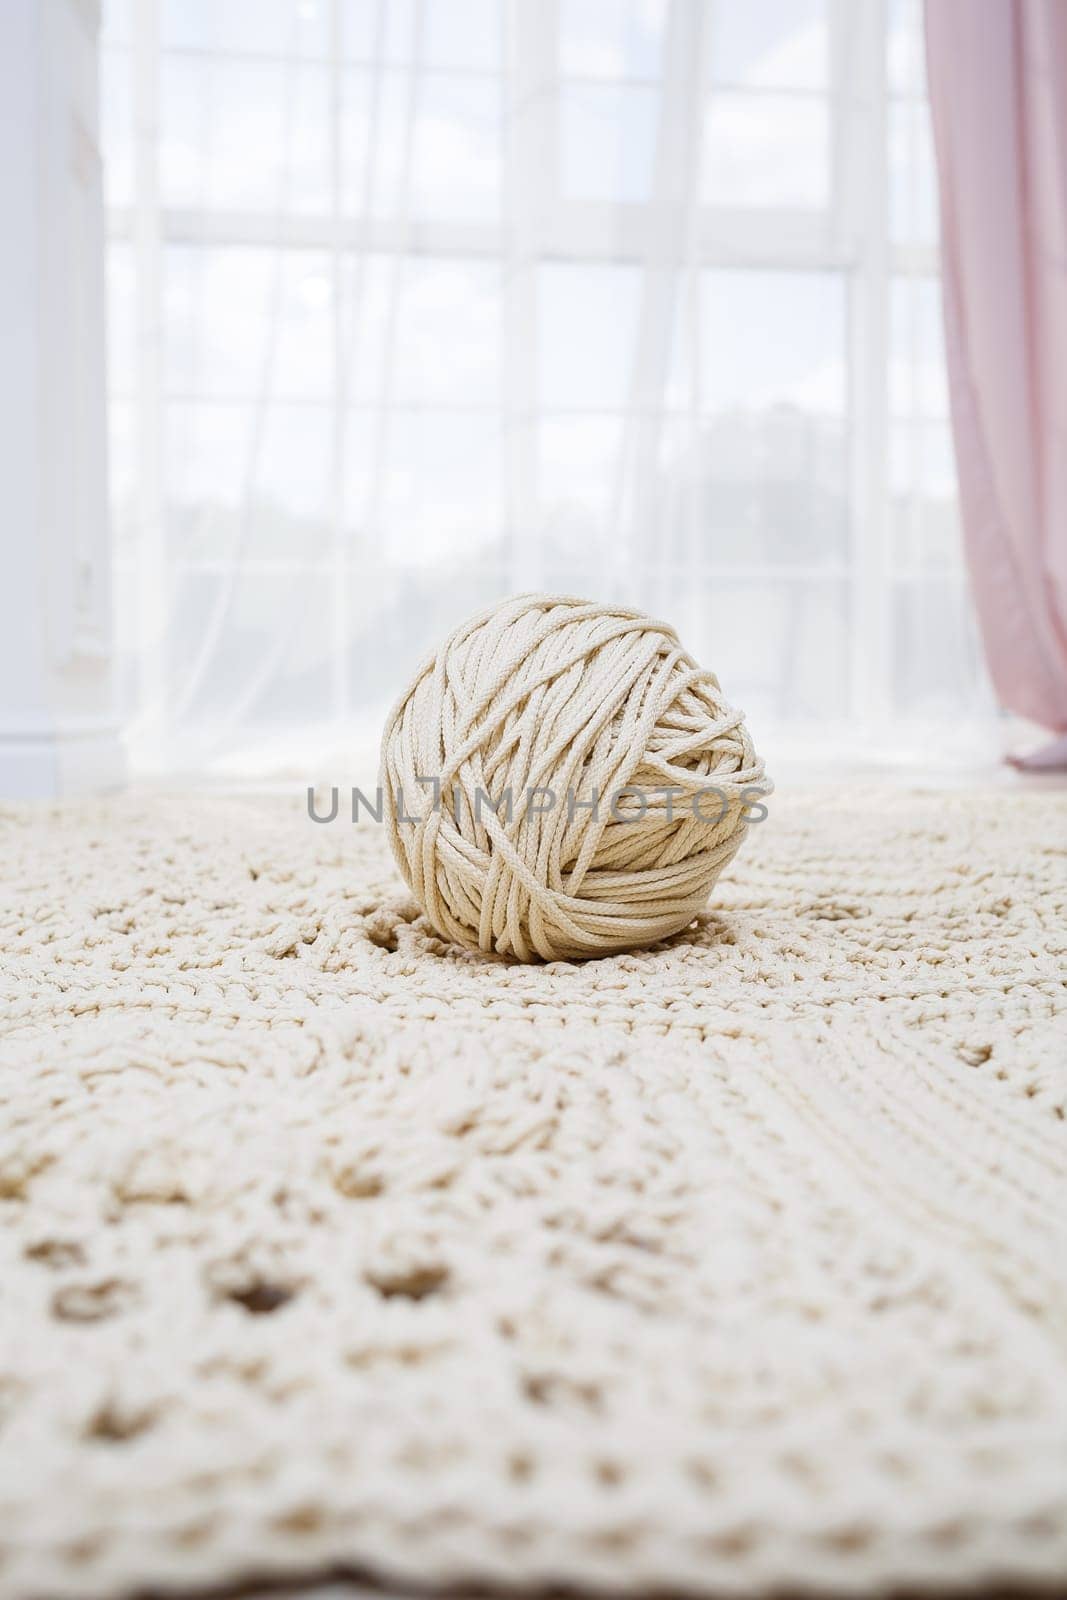 Handmade carpet knitted from natural threads, flooring, natural cotton. Beige handmade carpet. Knitted decorative item. Skein of beige thread for knitting